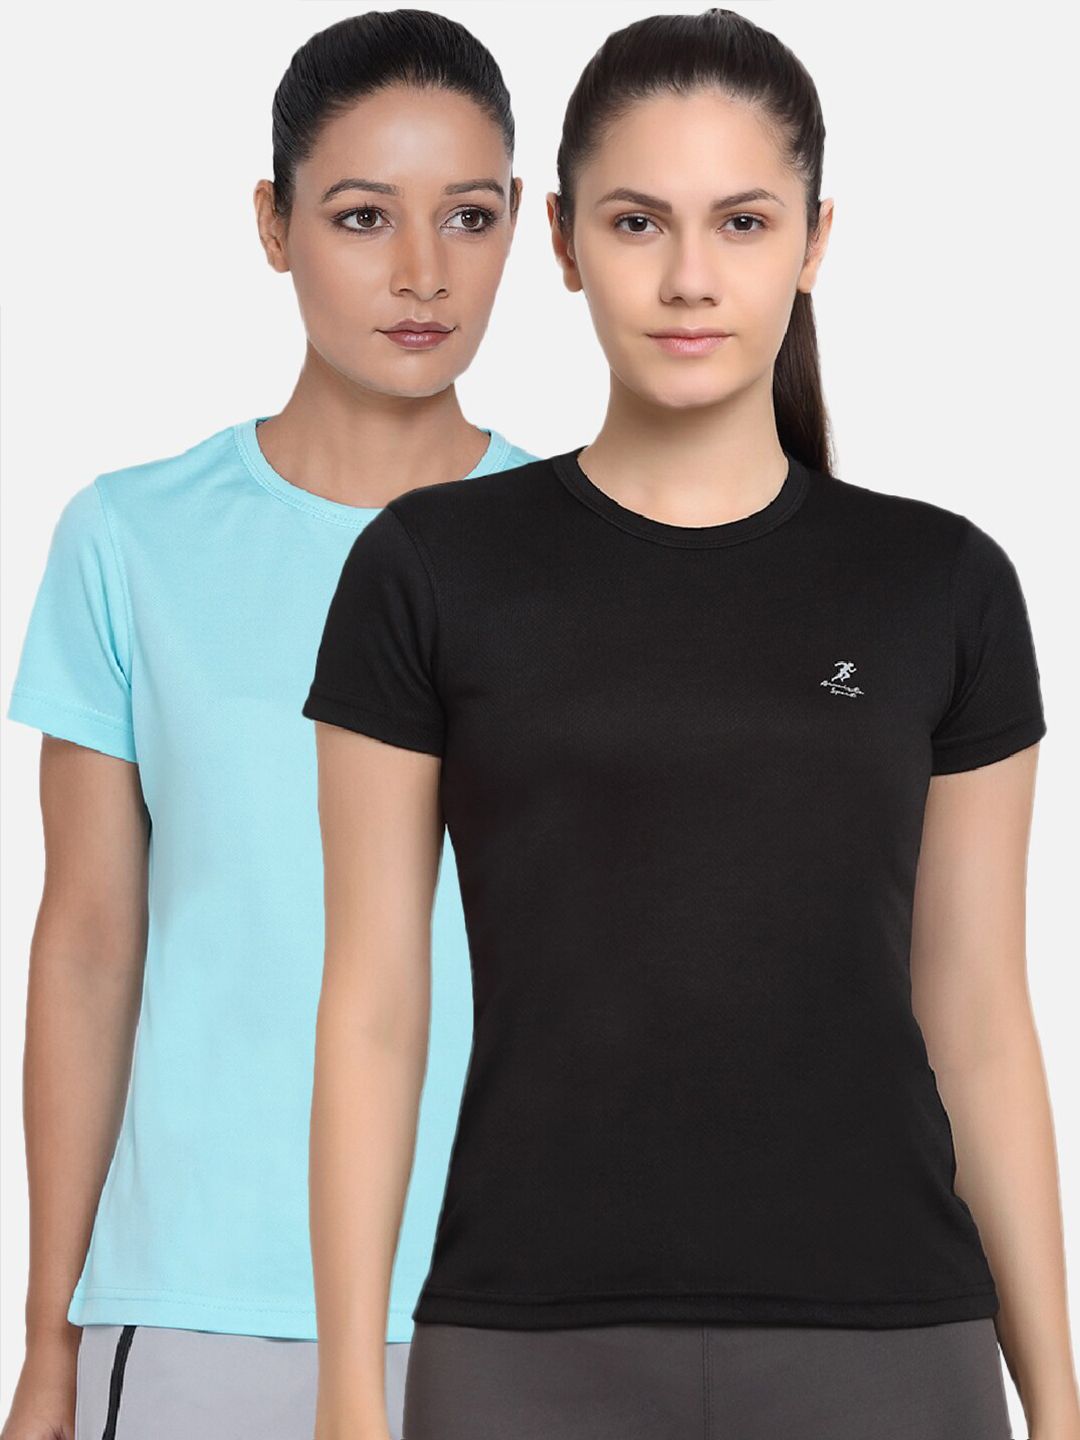 ARMISTO Women Pack of 2 Black & Blue Dri-FIT Slim Fit Training or Gym T-shirt Price in India